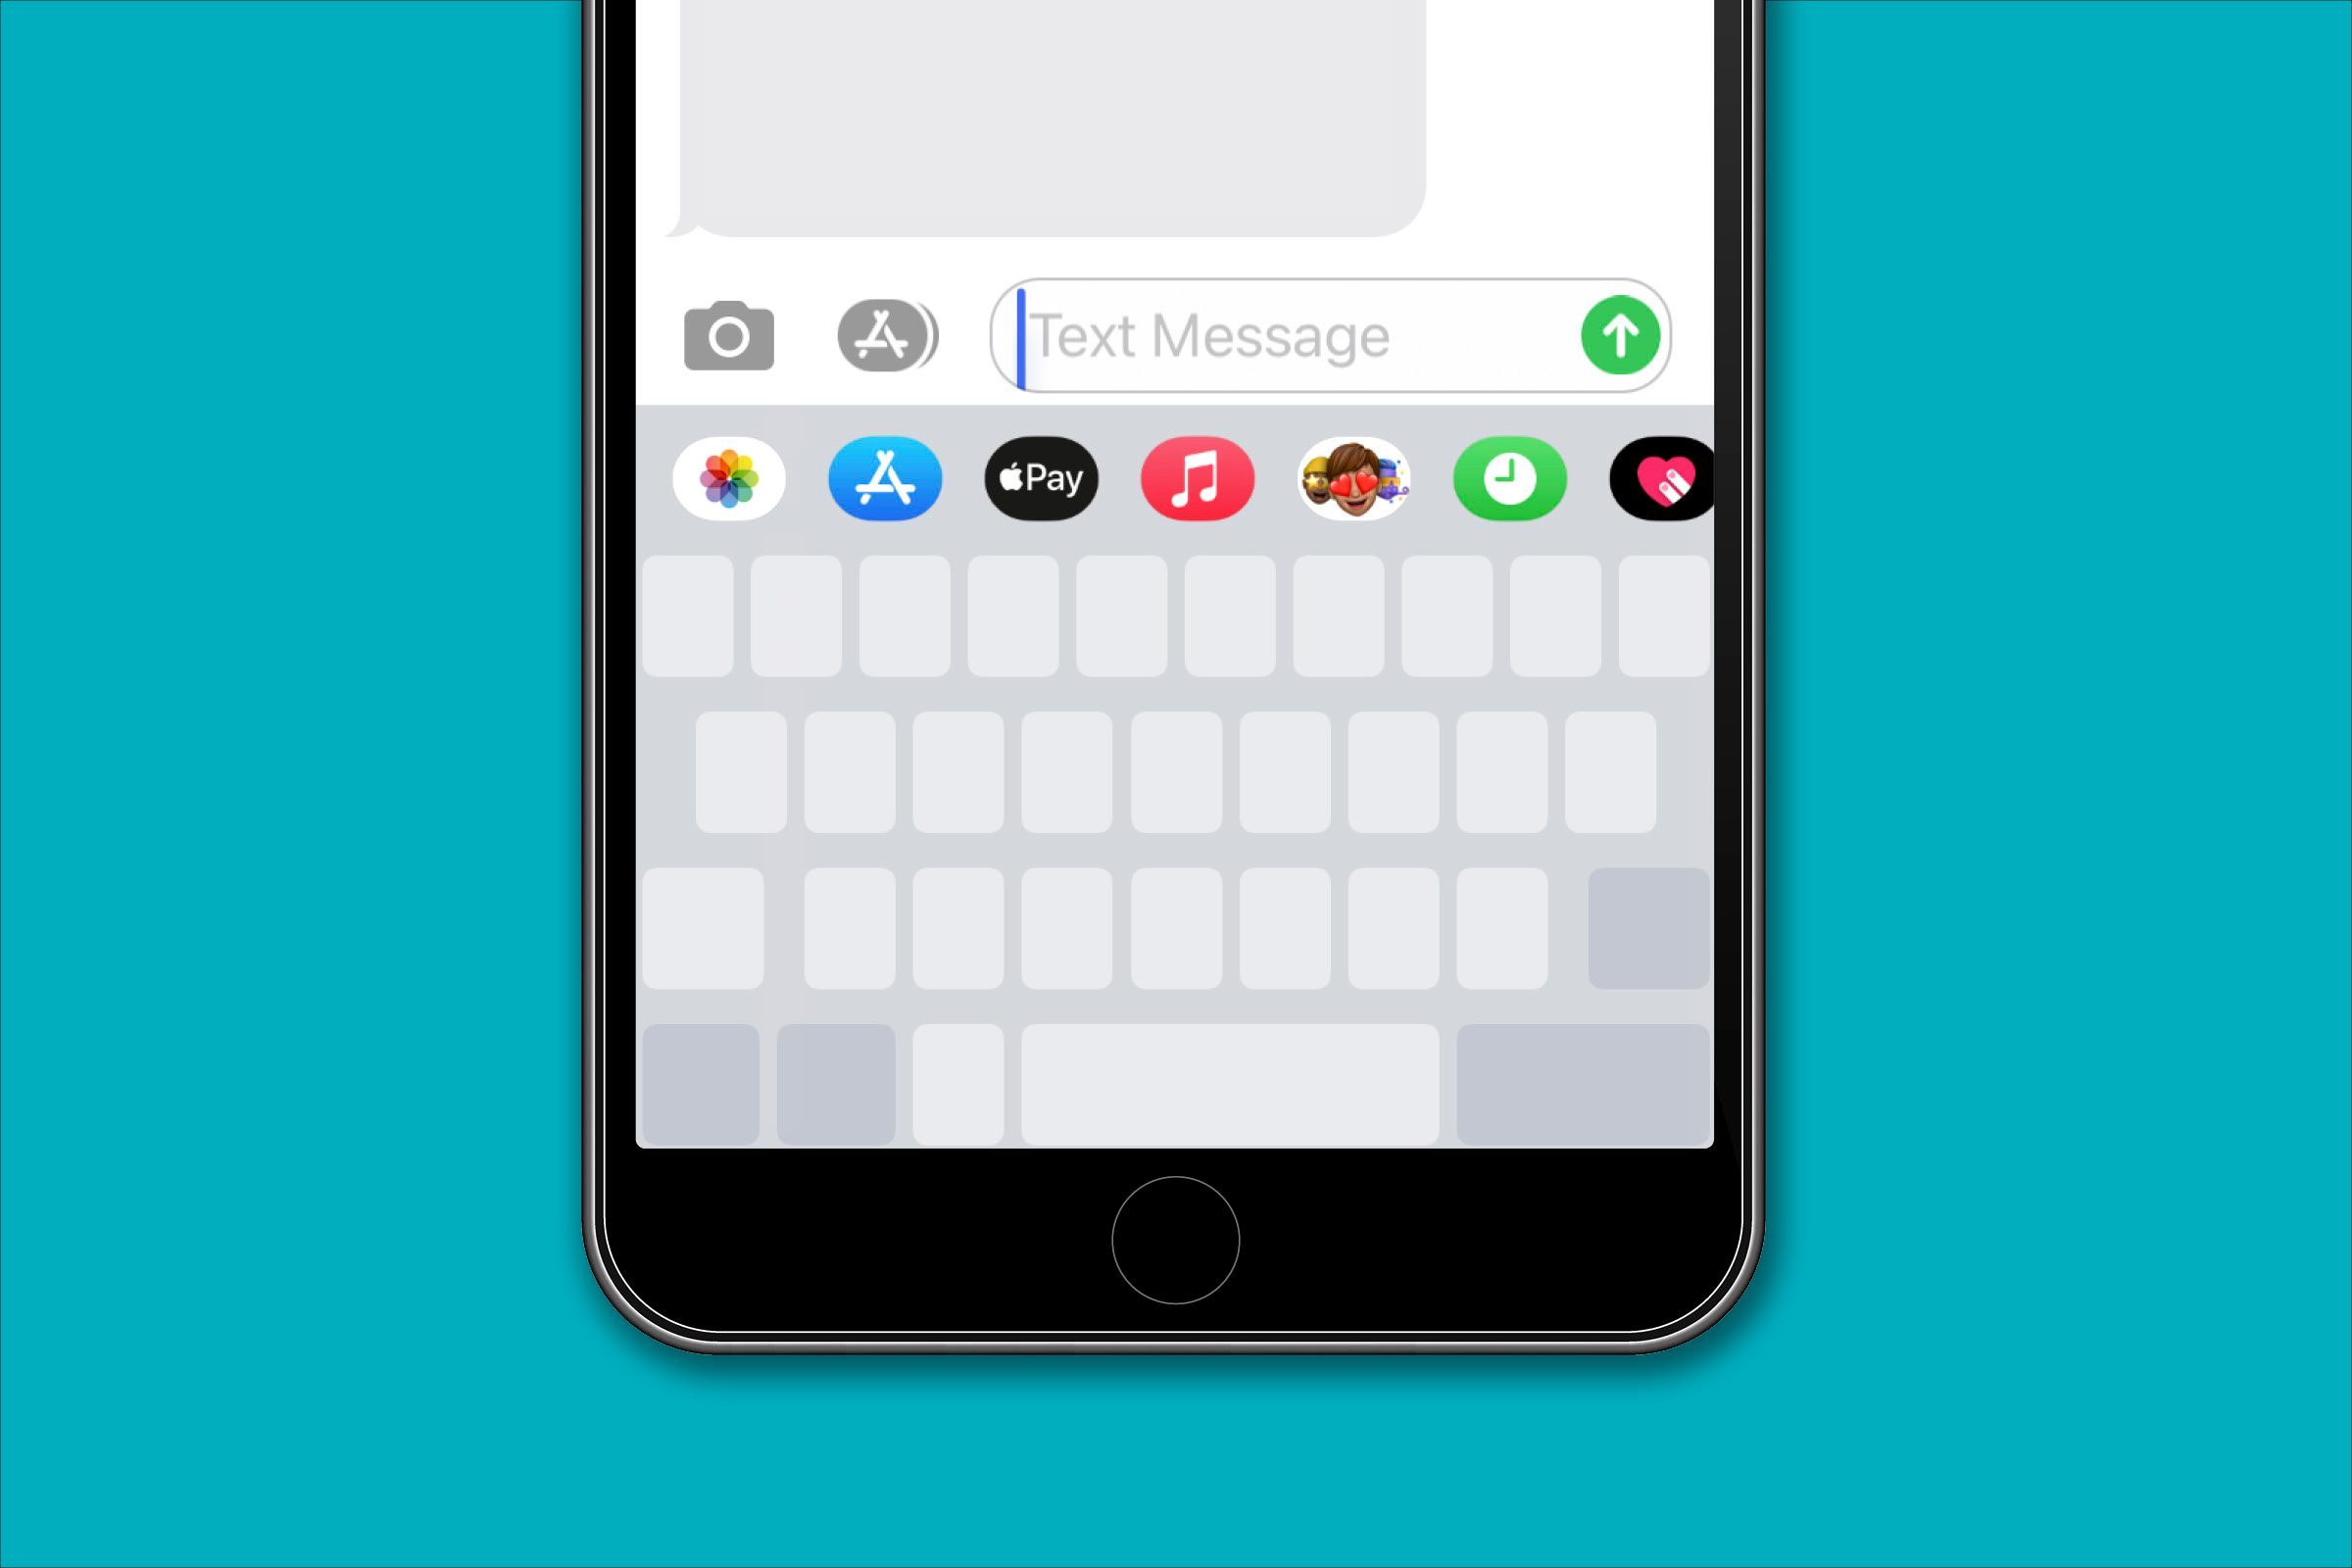 Make your iPhone keyboard function as a trackpad